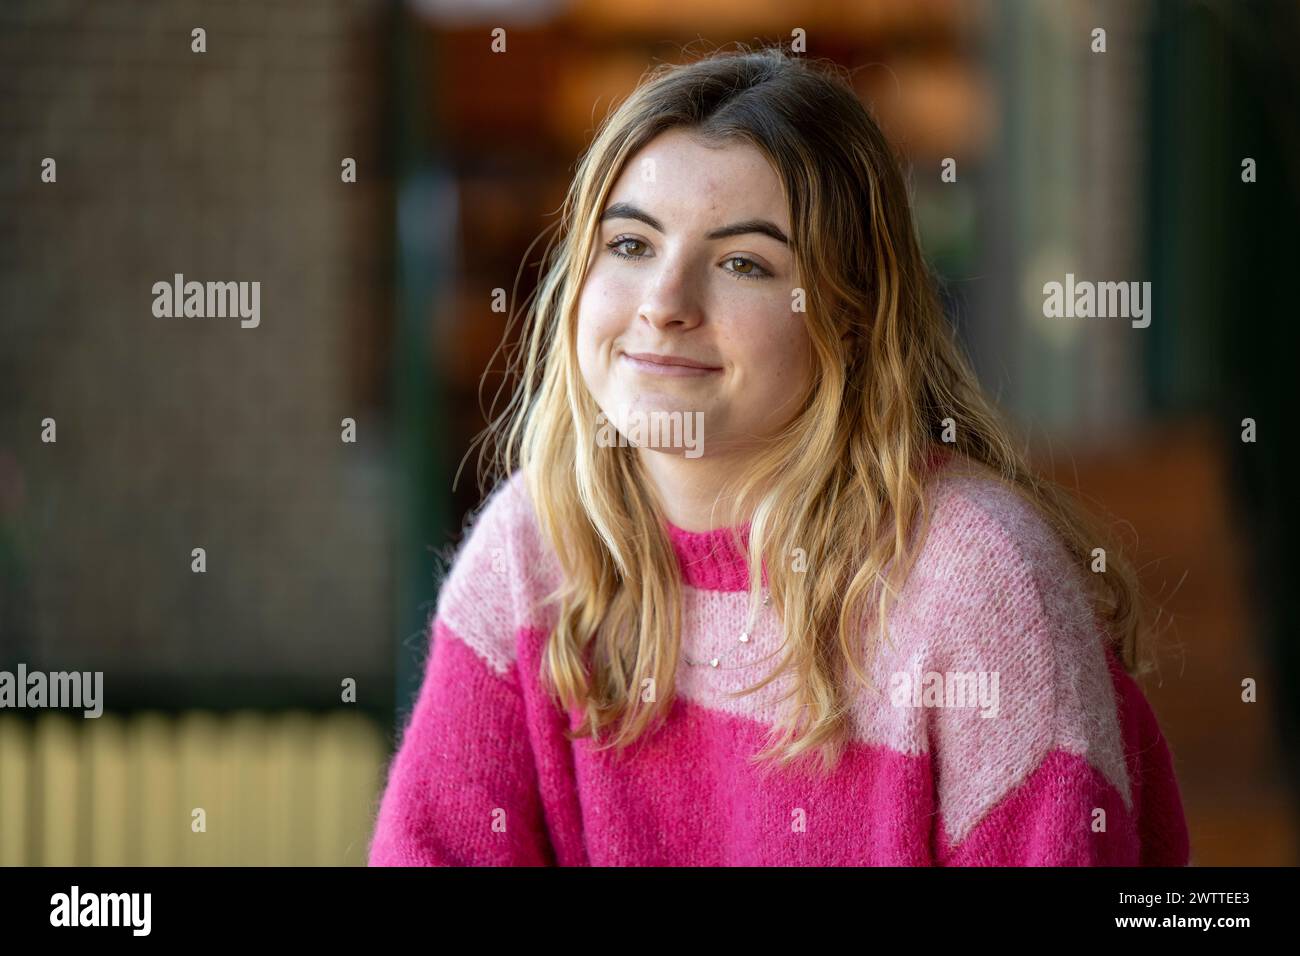 Smiling young woman in a pink sweater enjoying the day outdoors. Stock Photo